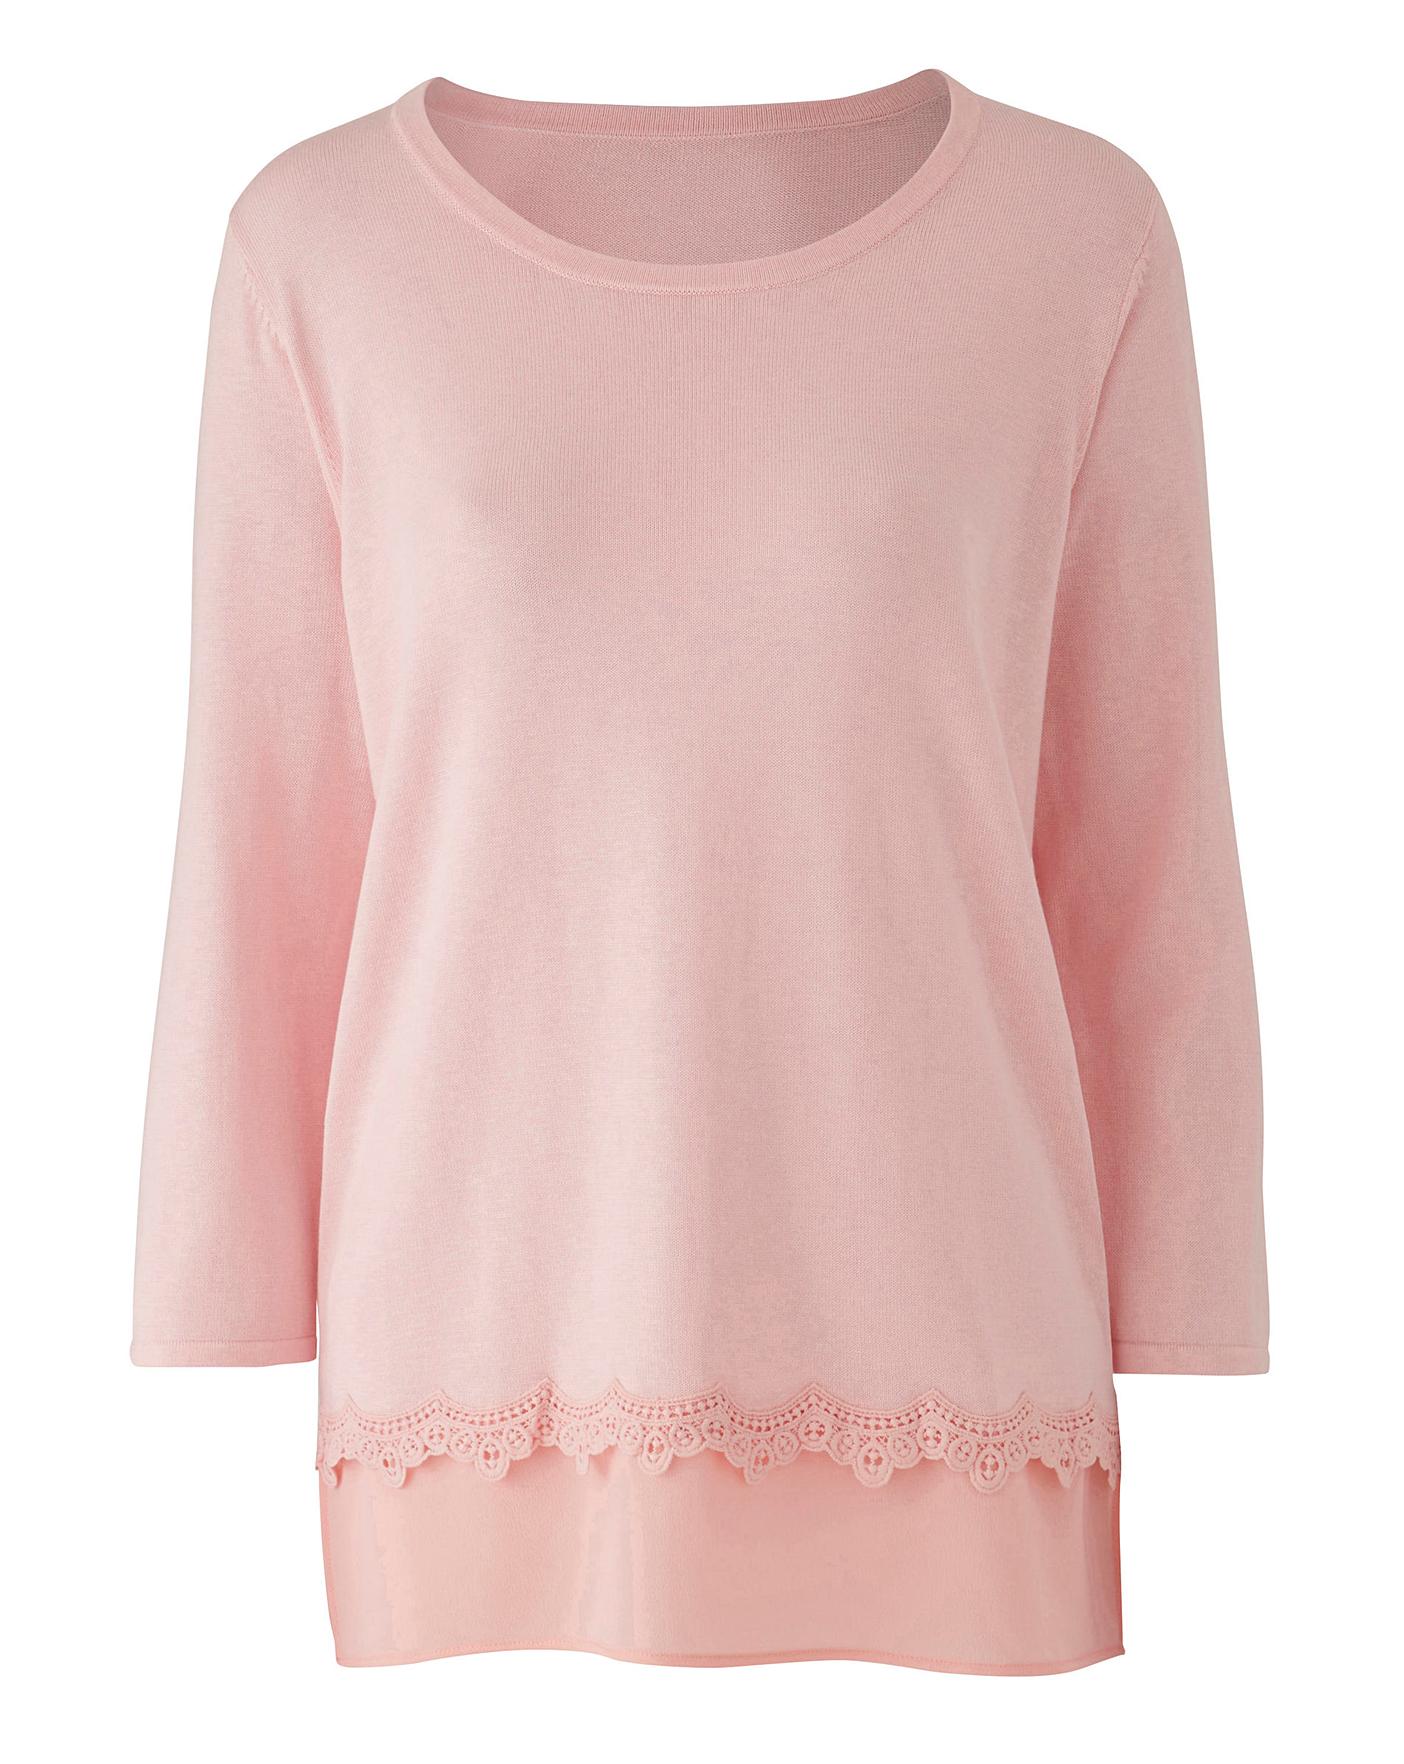 Together Lace Trim Layered Jumper | Oxendales